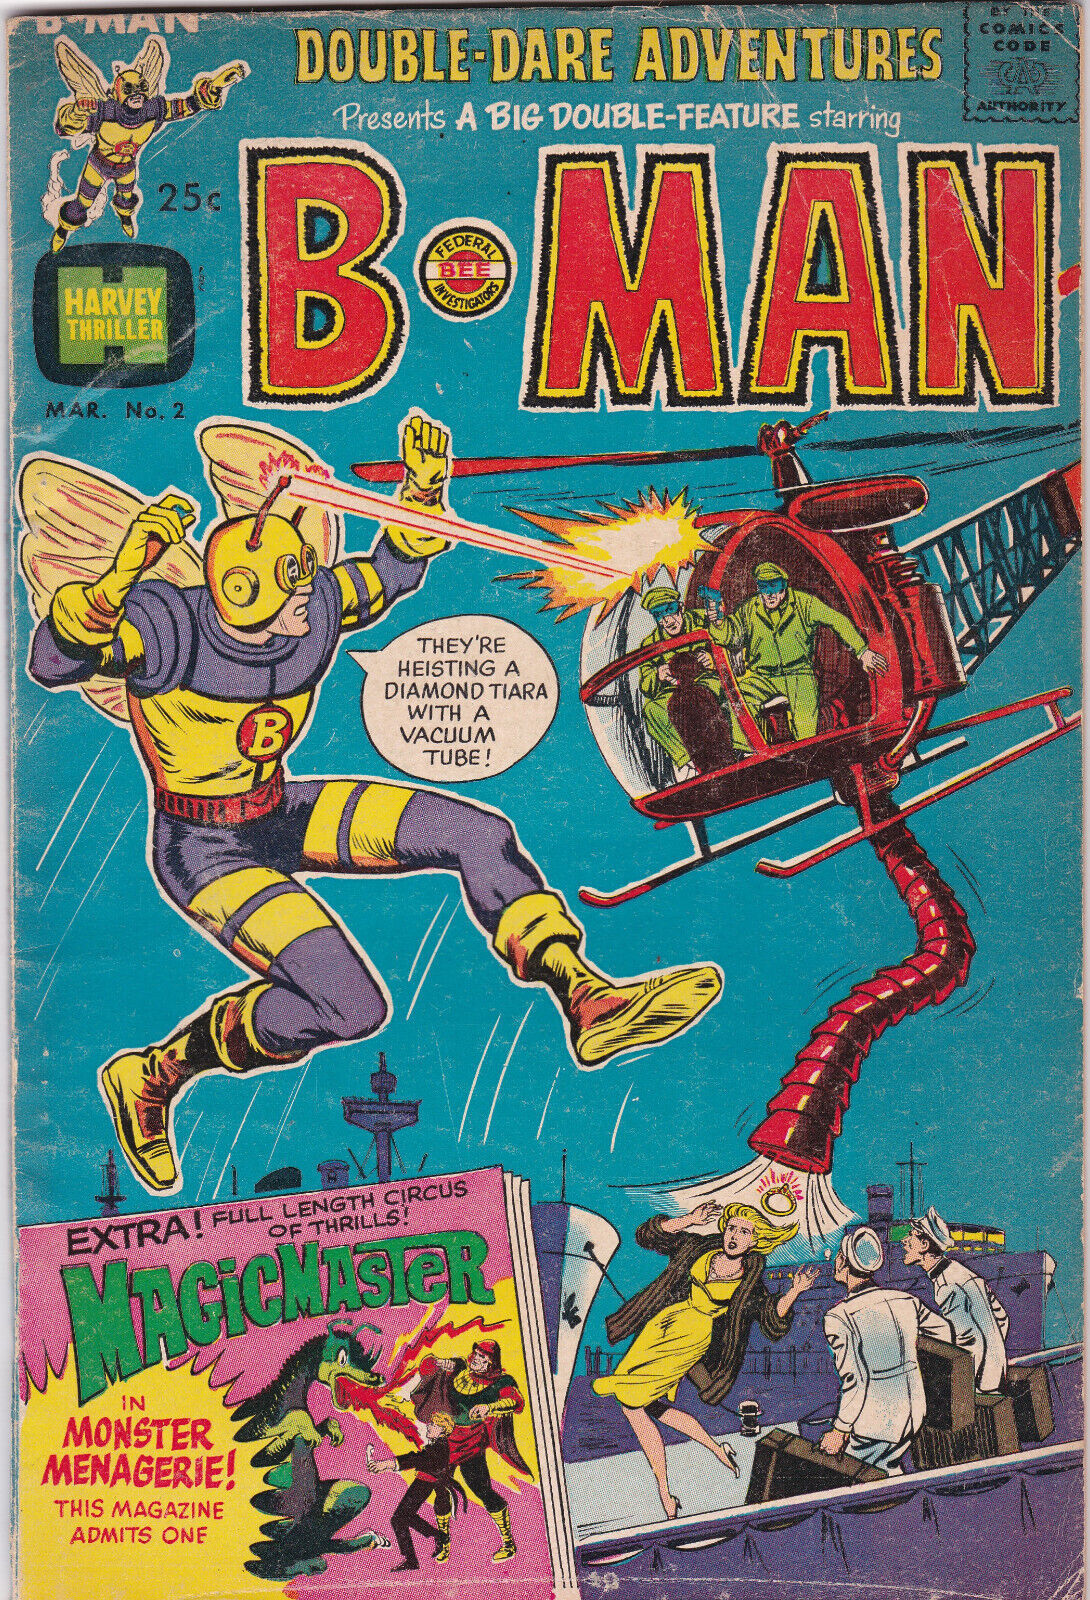 Double-Dare Adventures #2 B-Man 1967 Harvey Thriller Giant-Size Comic Book VG/FN